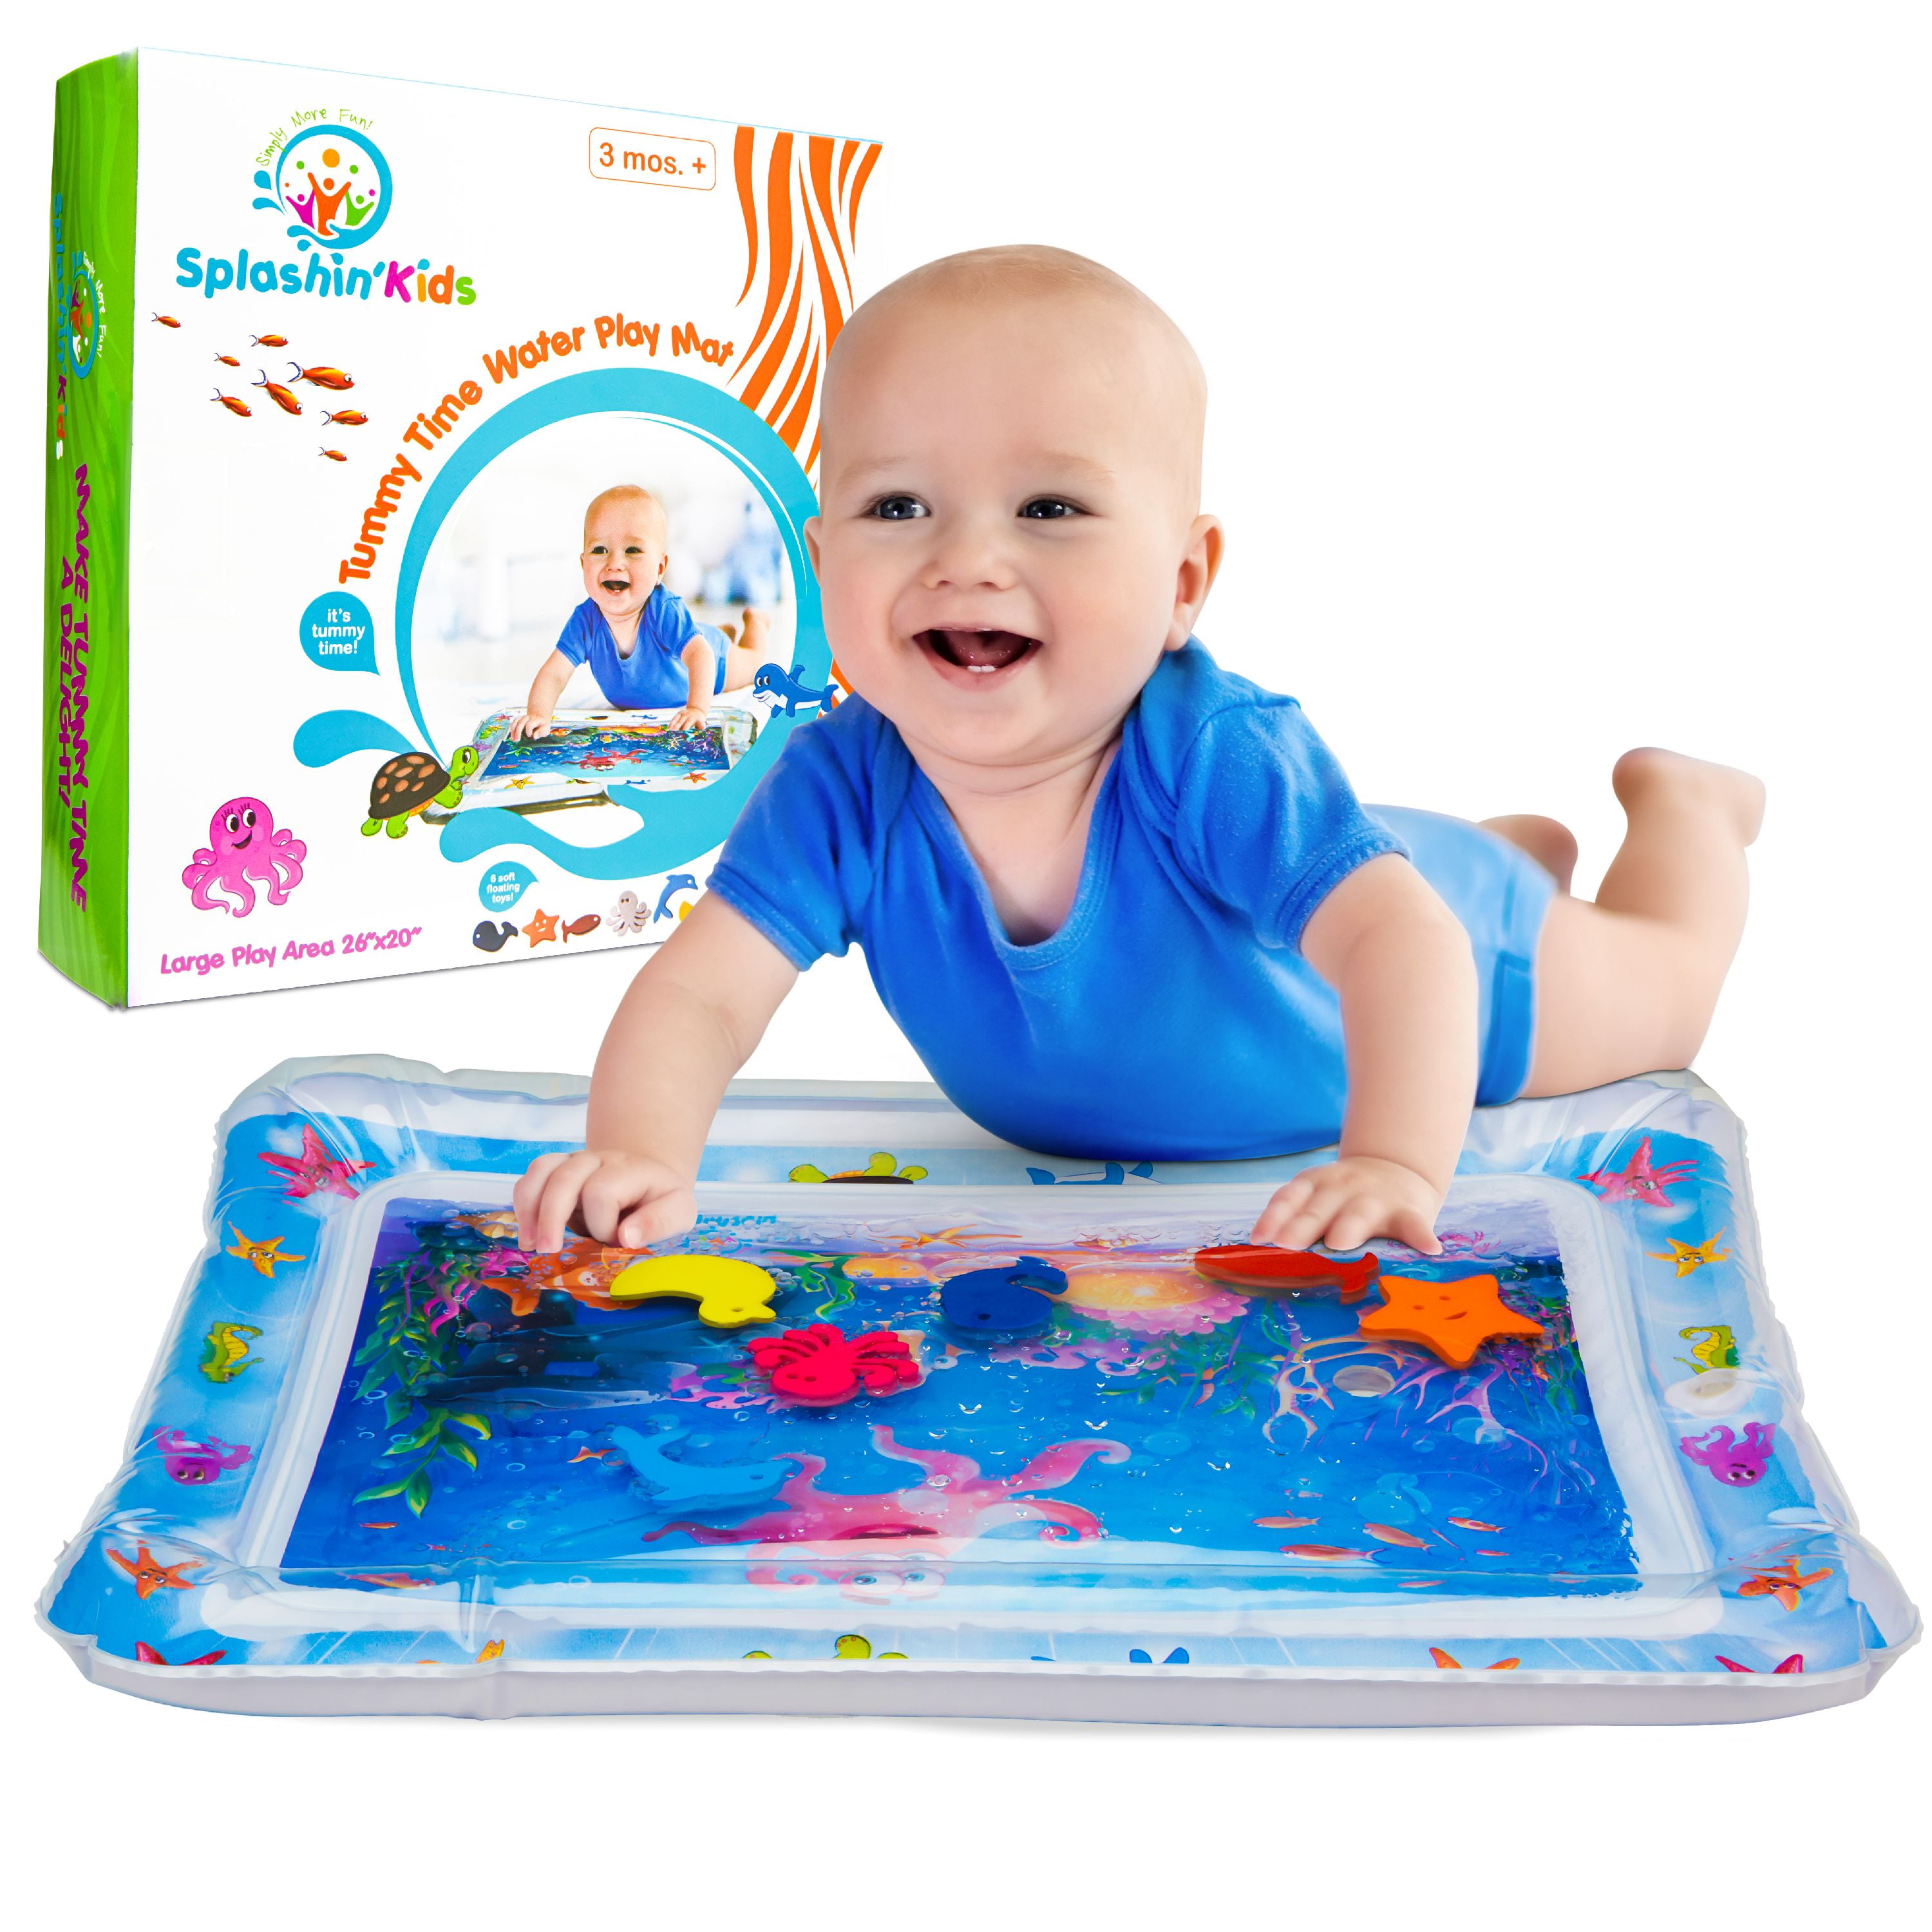 homese Baby Colorful Inflatable Water Play Mat Tummy Time Fun Mat Child Development Play Center with Hand Inflator Pump for 4~6 Years Old Infants-White 